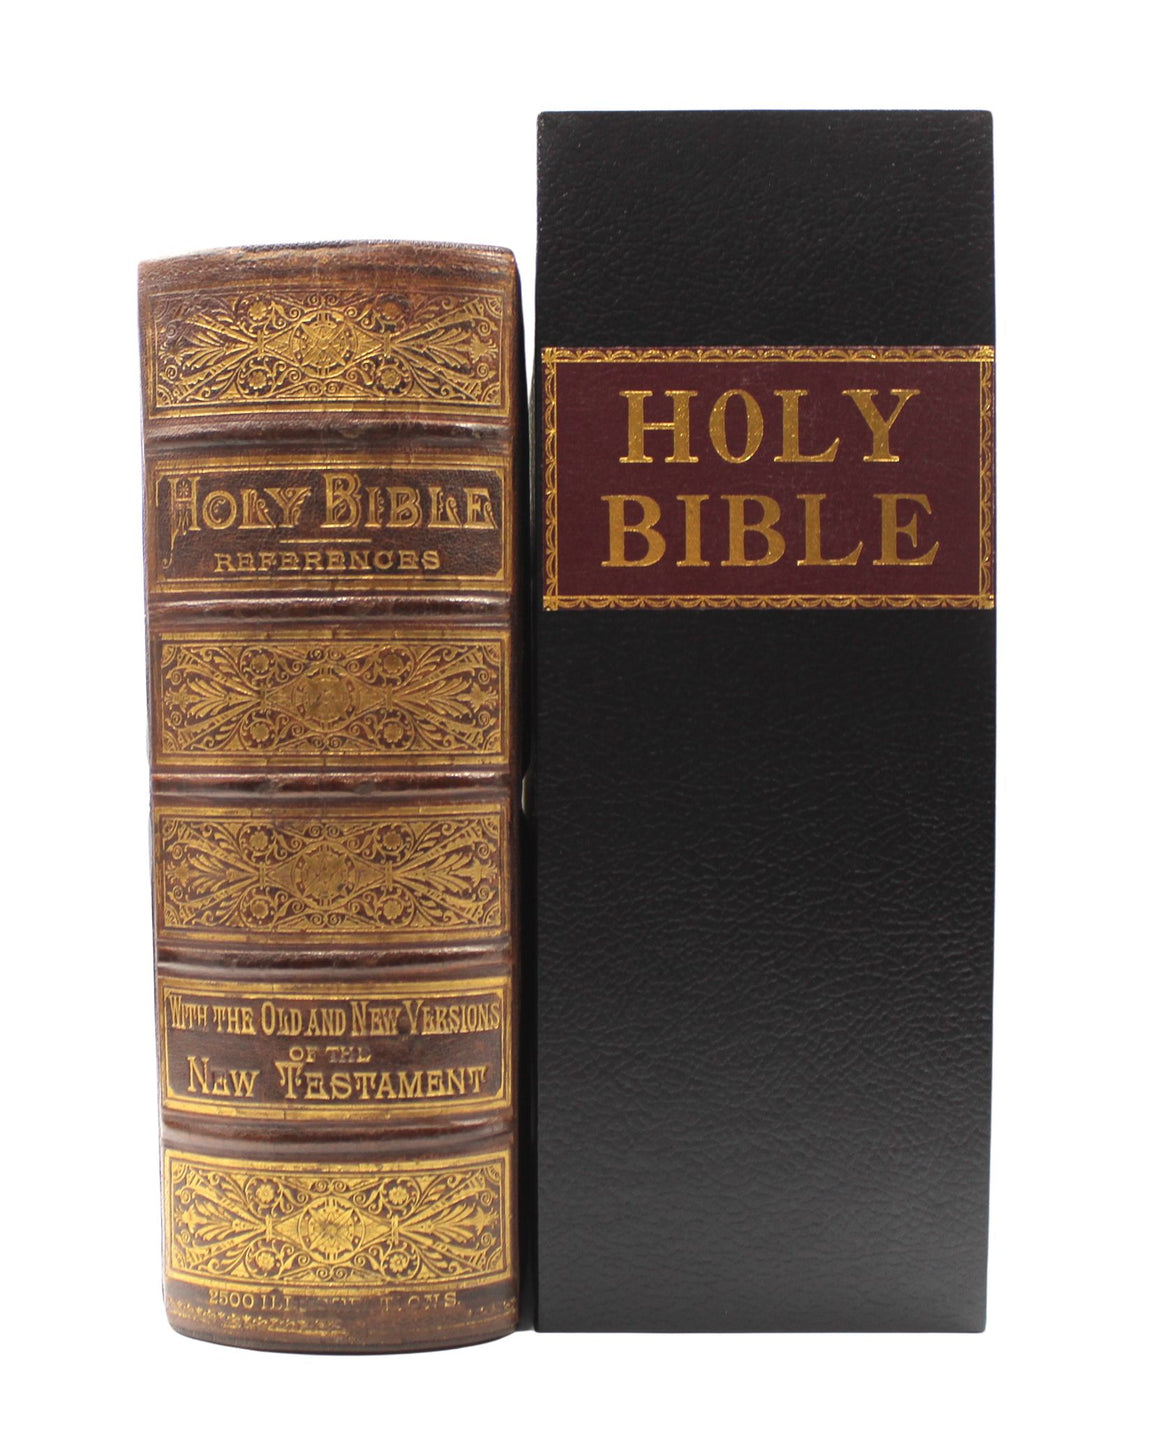 The Holy Bible, Containing the Old and New Testaments and Apocrypha, Standard Edition, Illustrated, 1885